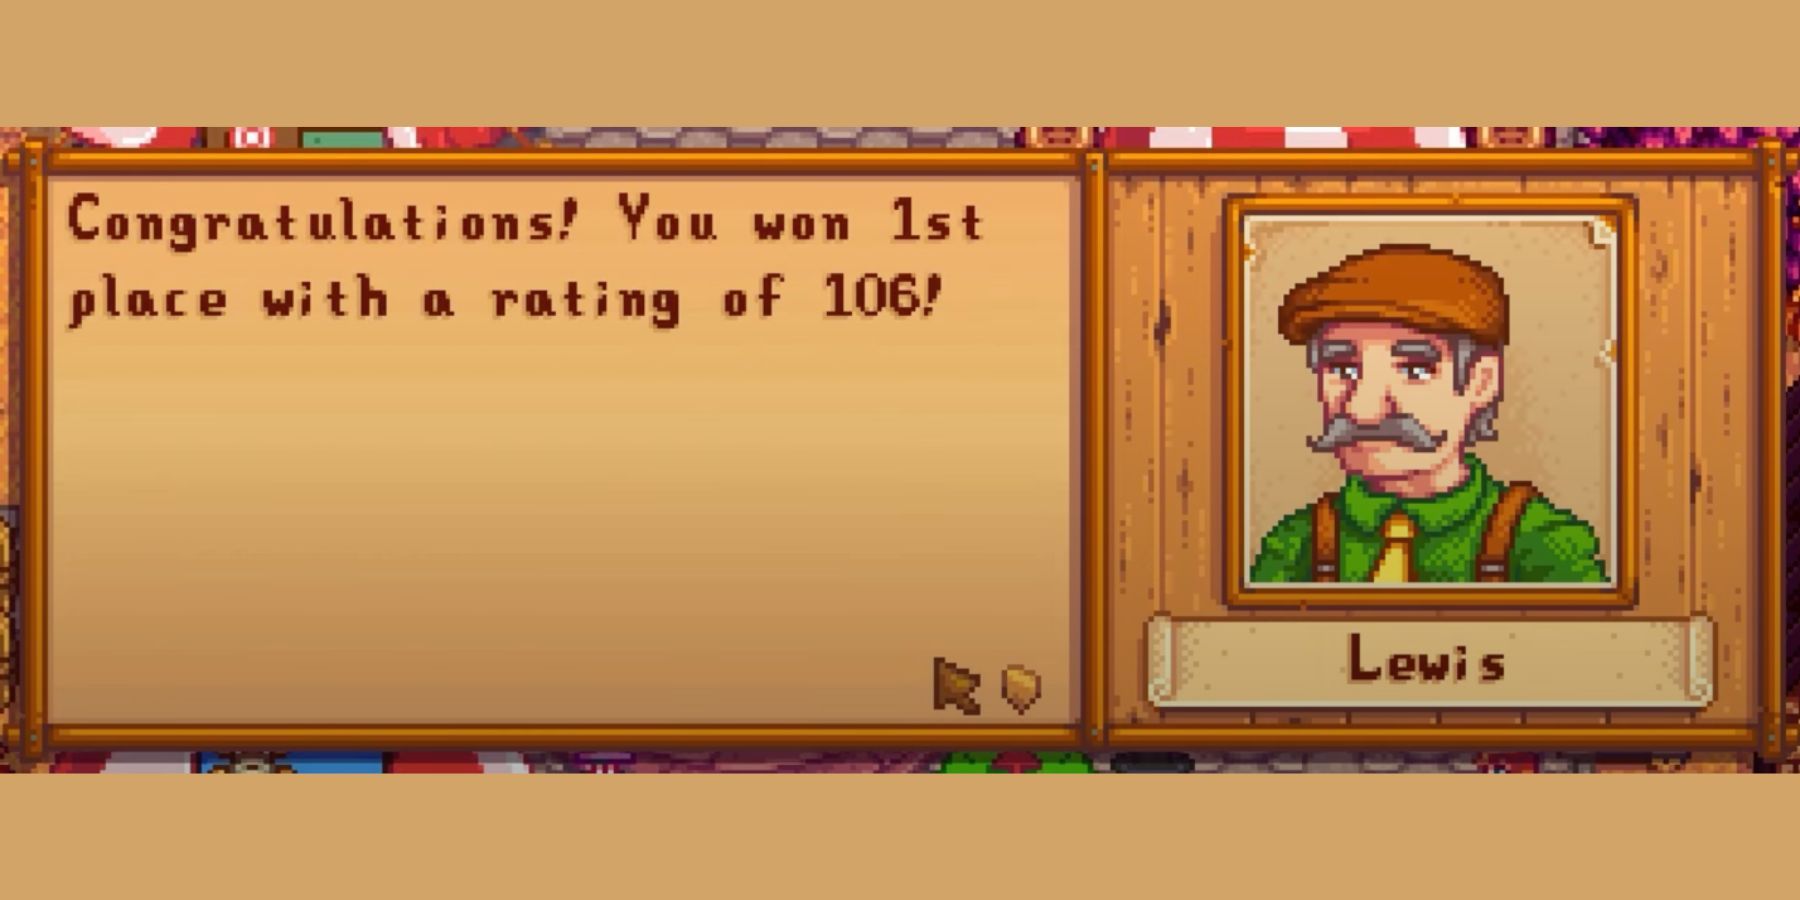 lewis declaring the player as the grange display contest winner in stardew valley.